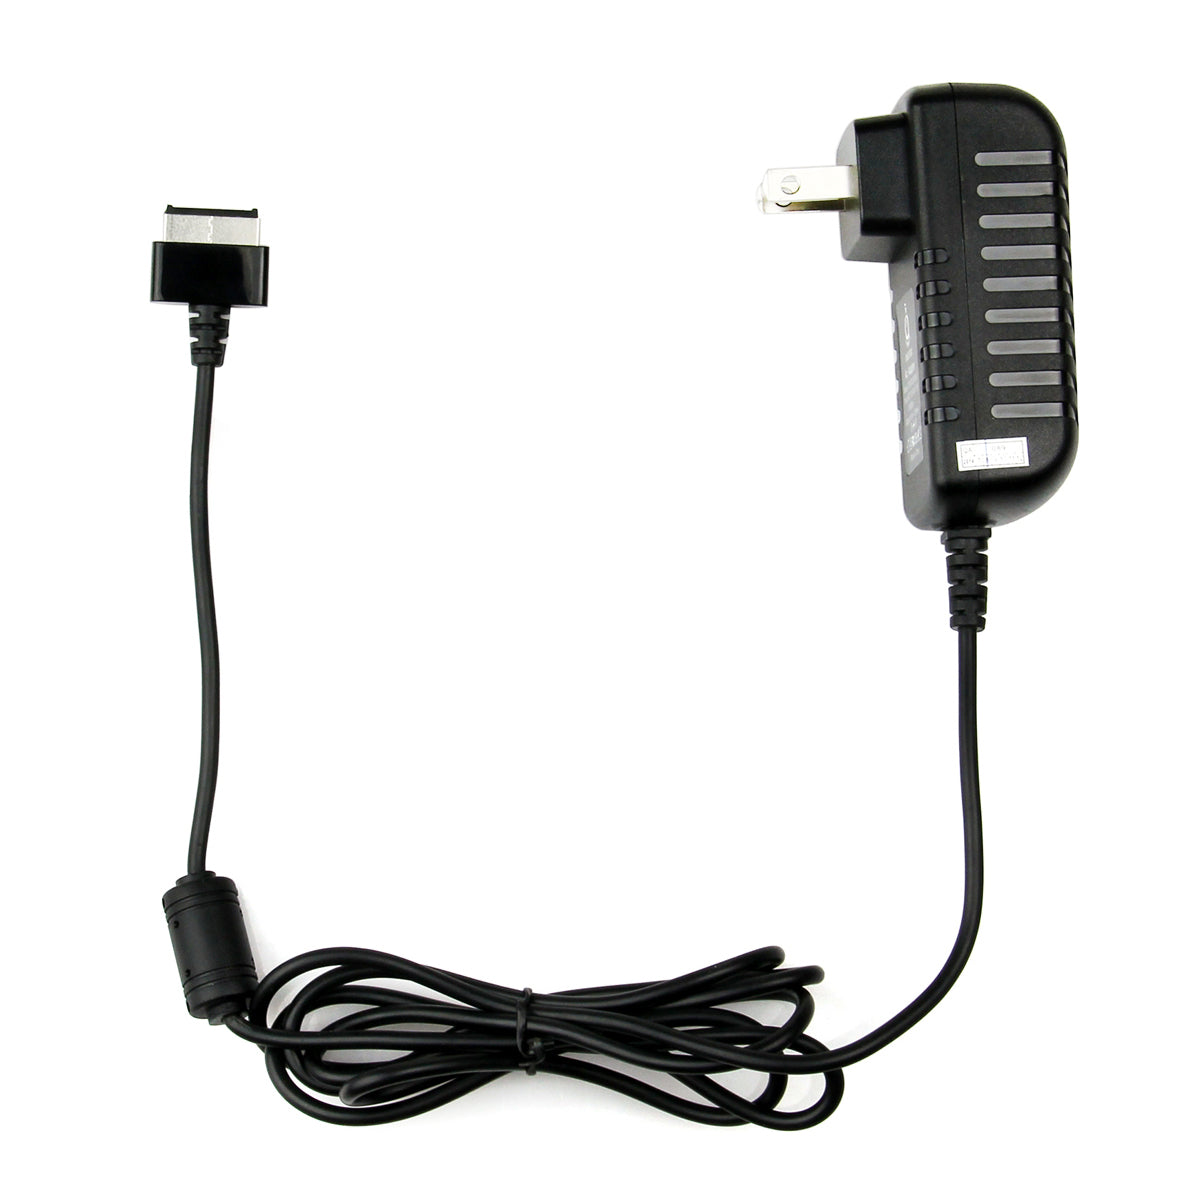 AC Adapter Charger for ASUS TF700T B1 Eee Pad.